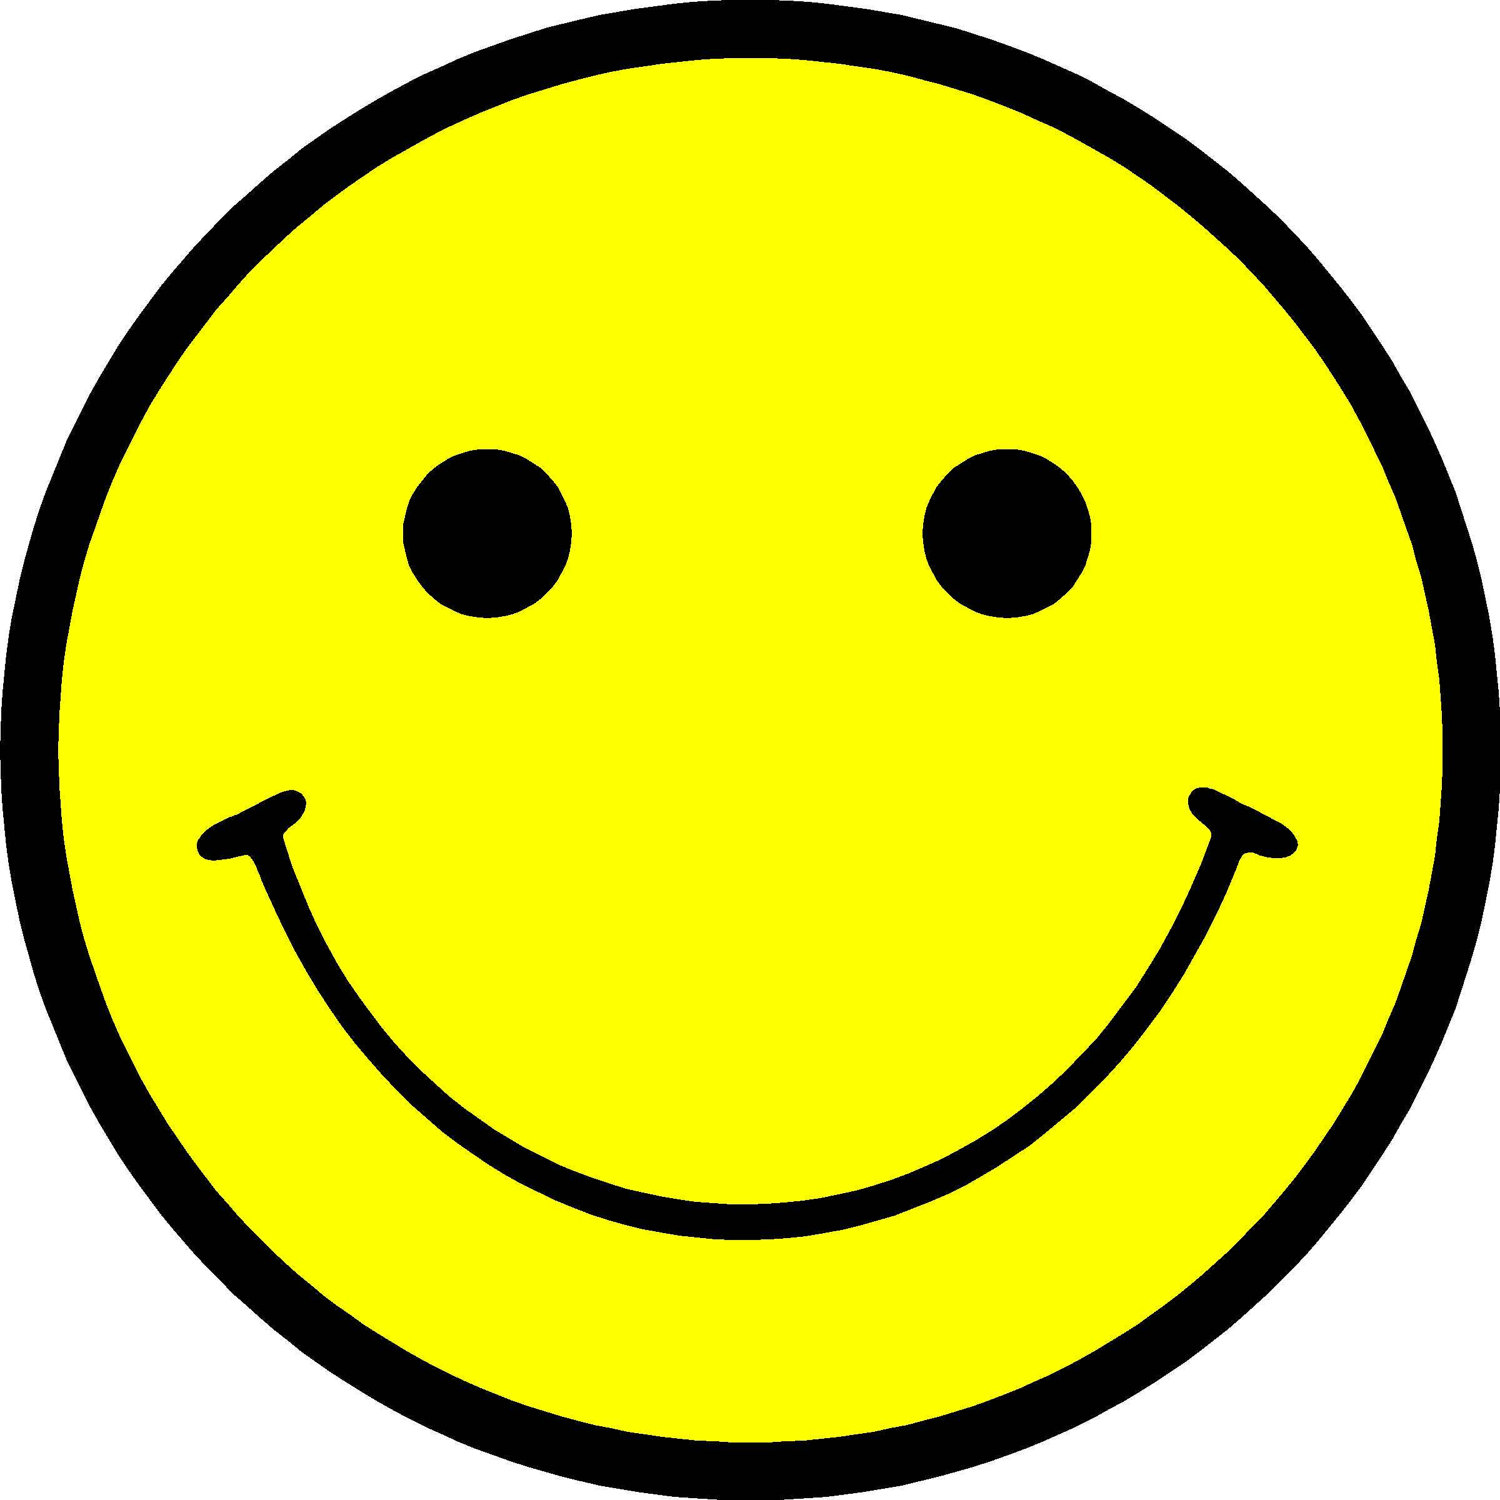 smiley-face-image-clipart-best